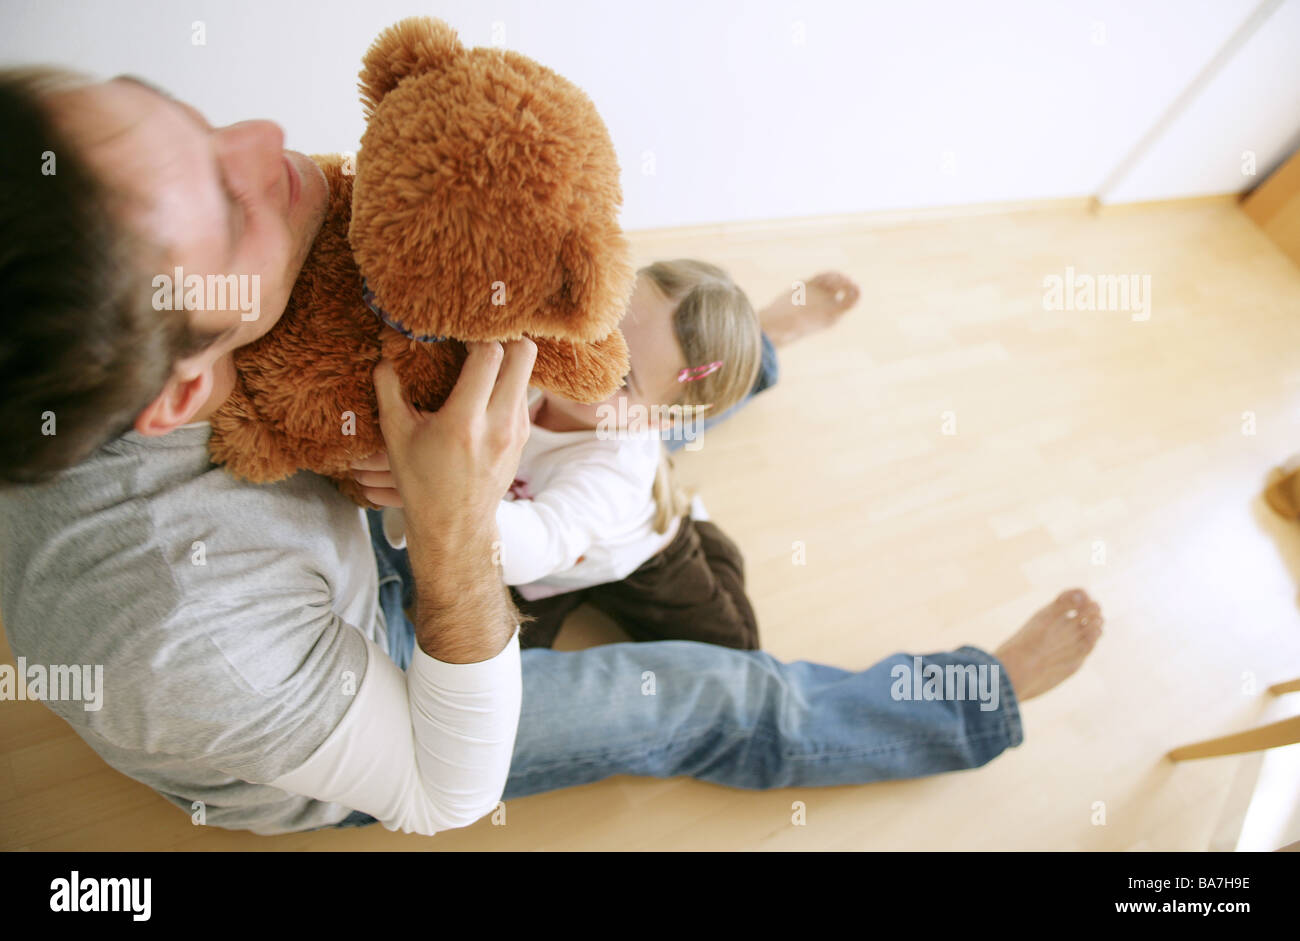 Father and daughter (3-4 years) playing with a teddy bear, Munich, Germany Stock Photo